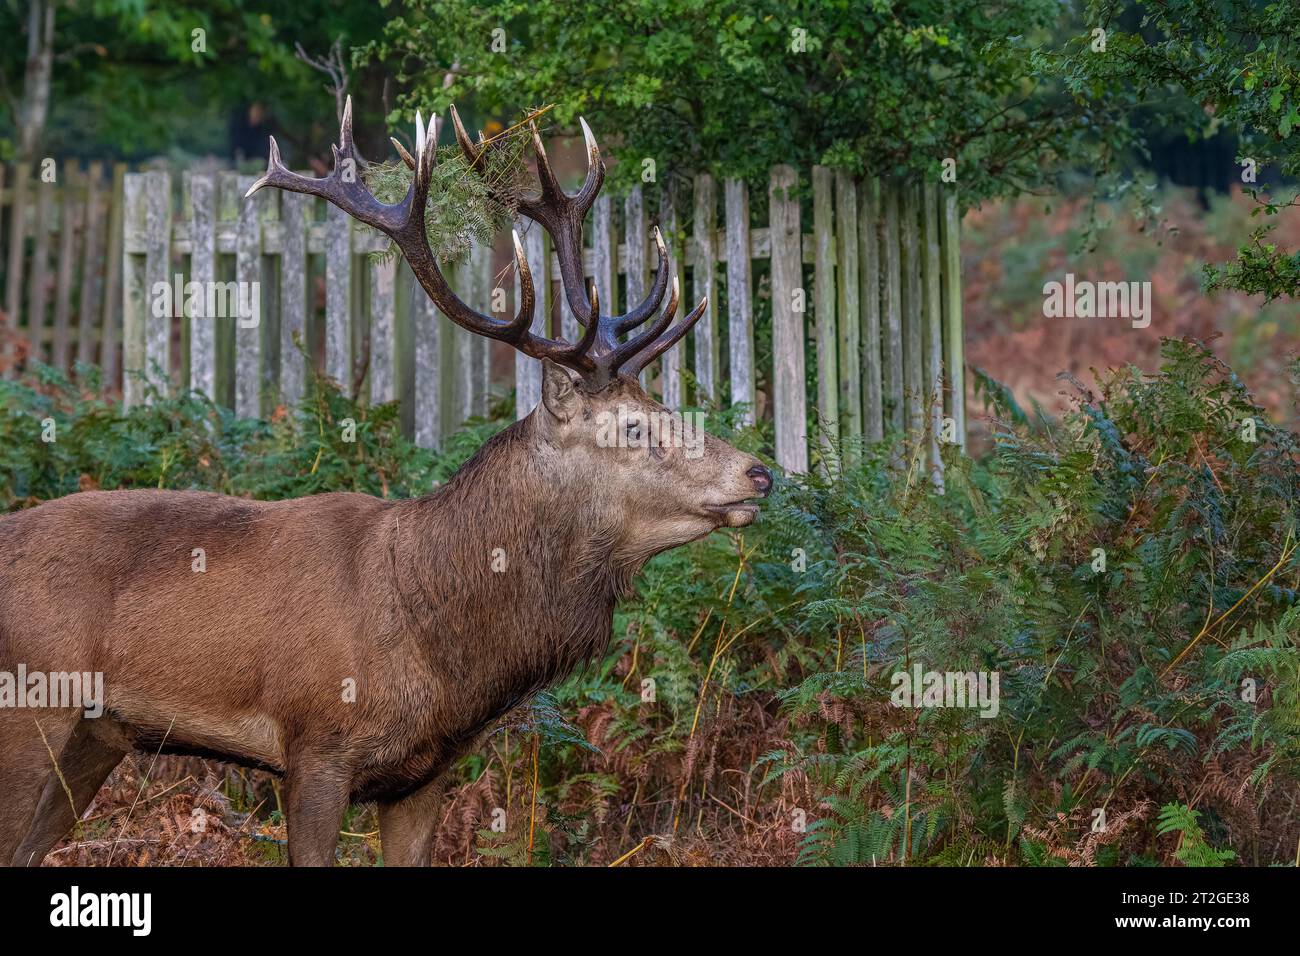 Red deer stag in Bushy Park Hampton hill London UK one early moring Stock Photo